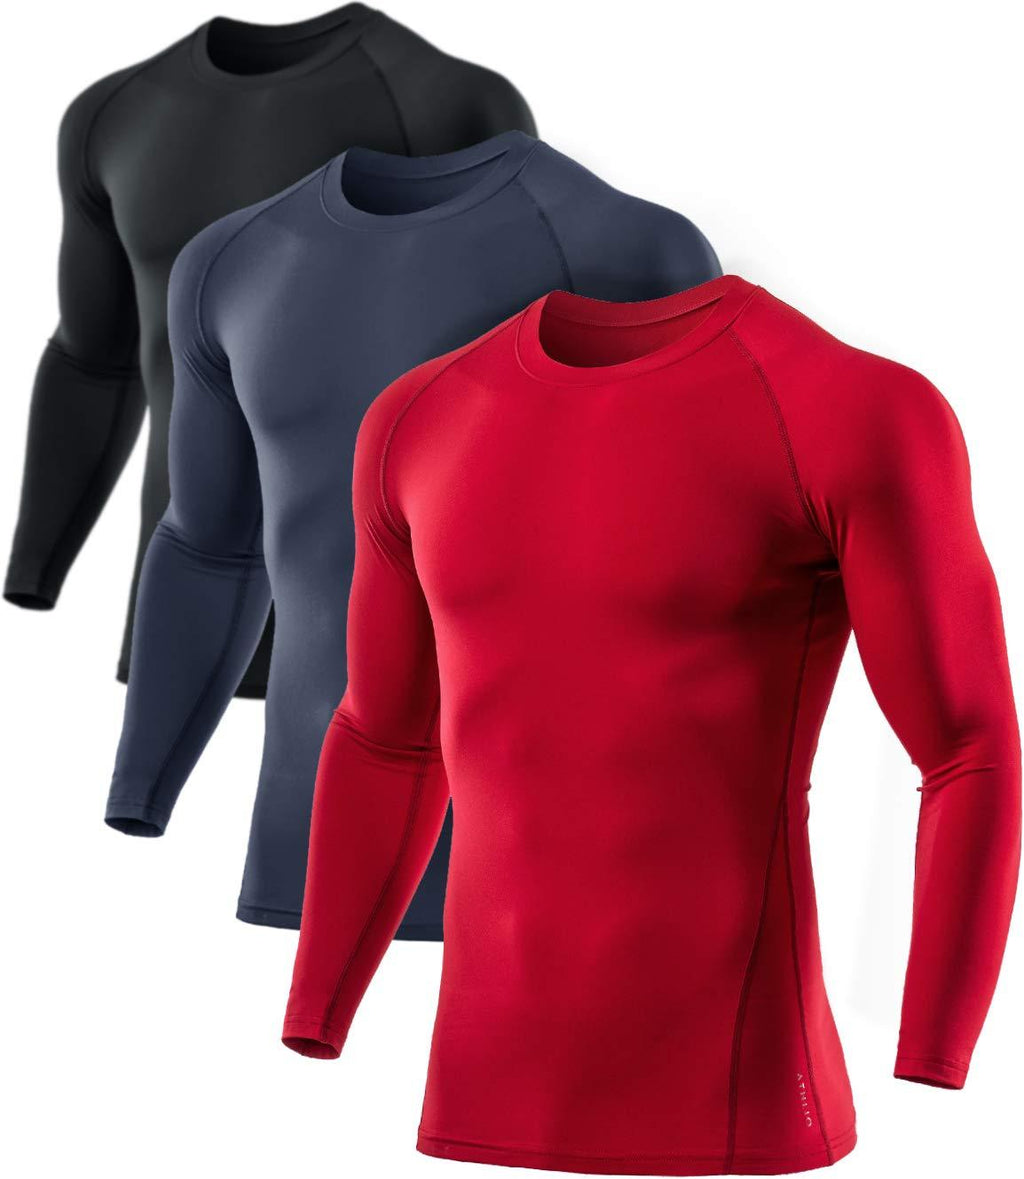 [AUSTRALIA] - ATHLIO Men's (Pack of 1 or 3) Thermal Wintergear Compression Baselayer Long Sleeve Top Active 3pack(lyd03) - Black/ Charcoal/ Red Large 